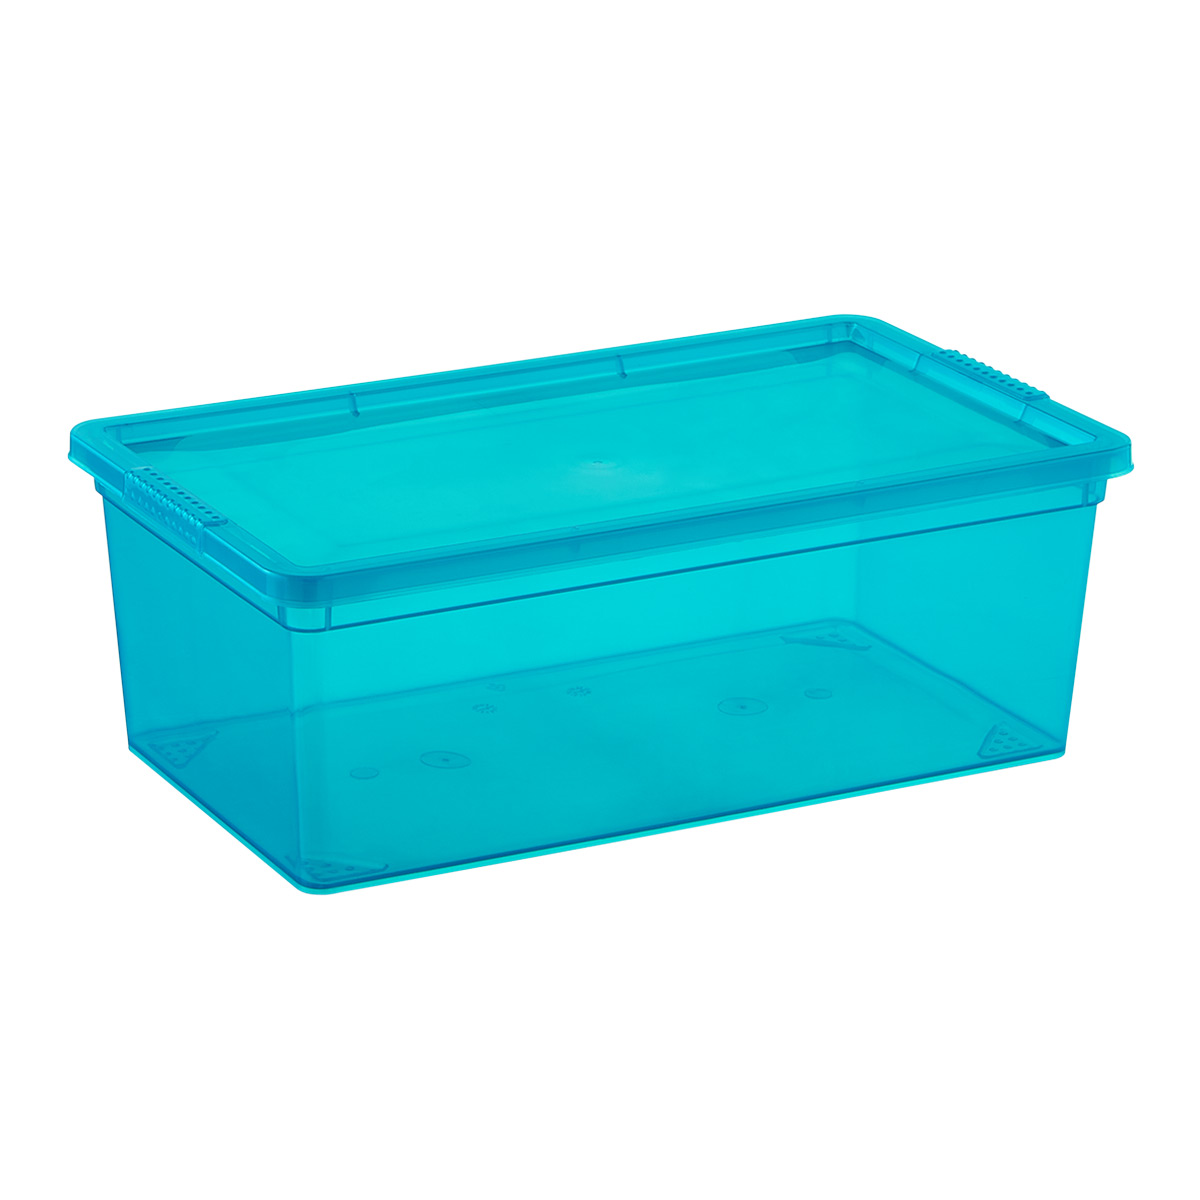 https://www.containerstore.com/catalogimages/434129/10085545_small_our_tidy_box_peacock.jpg